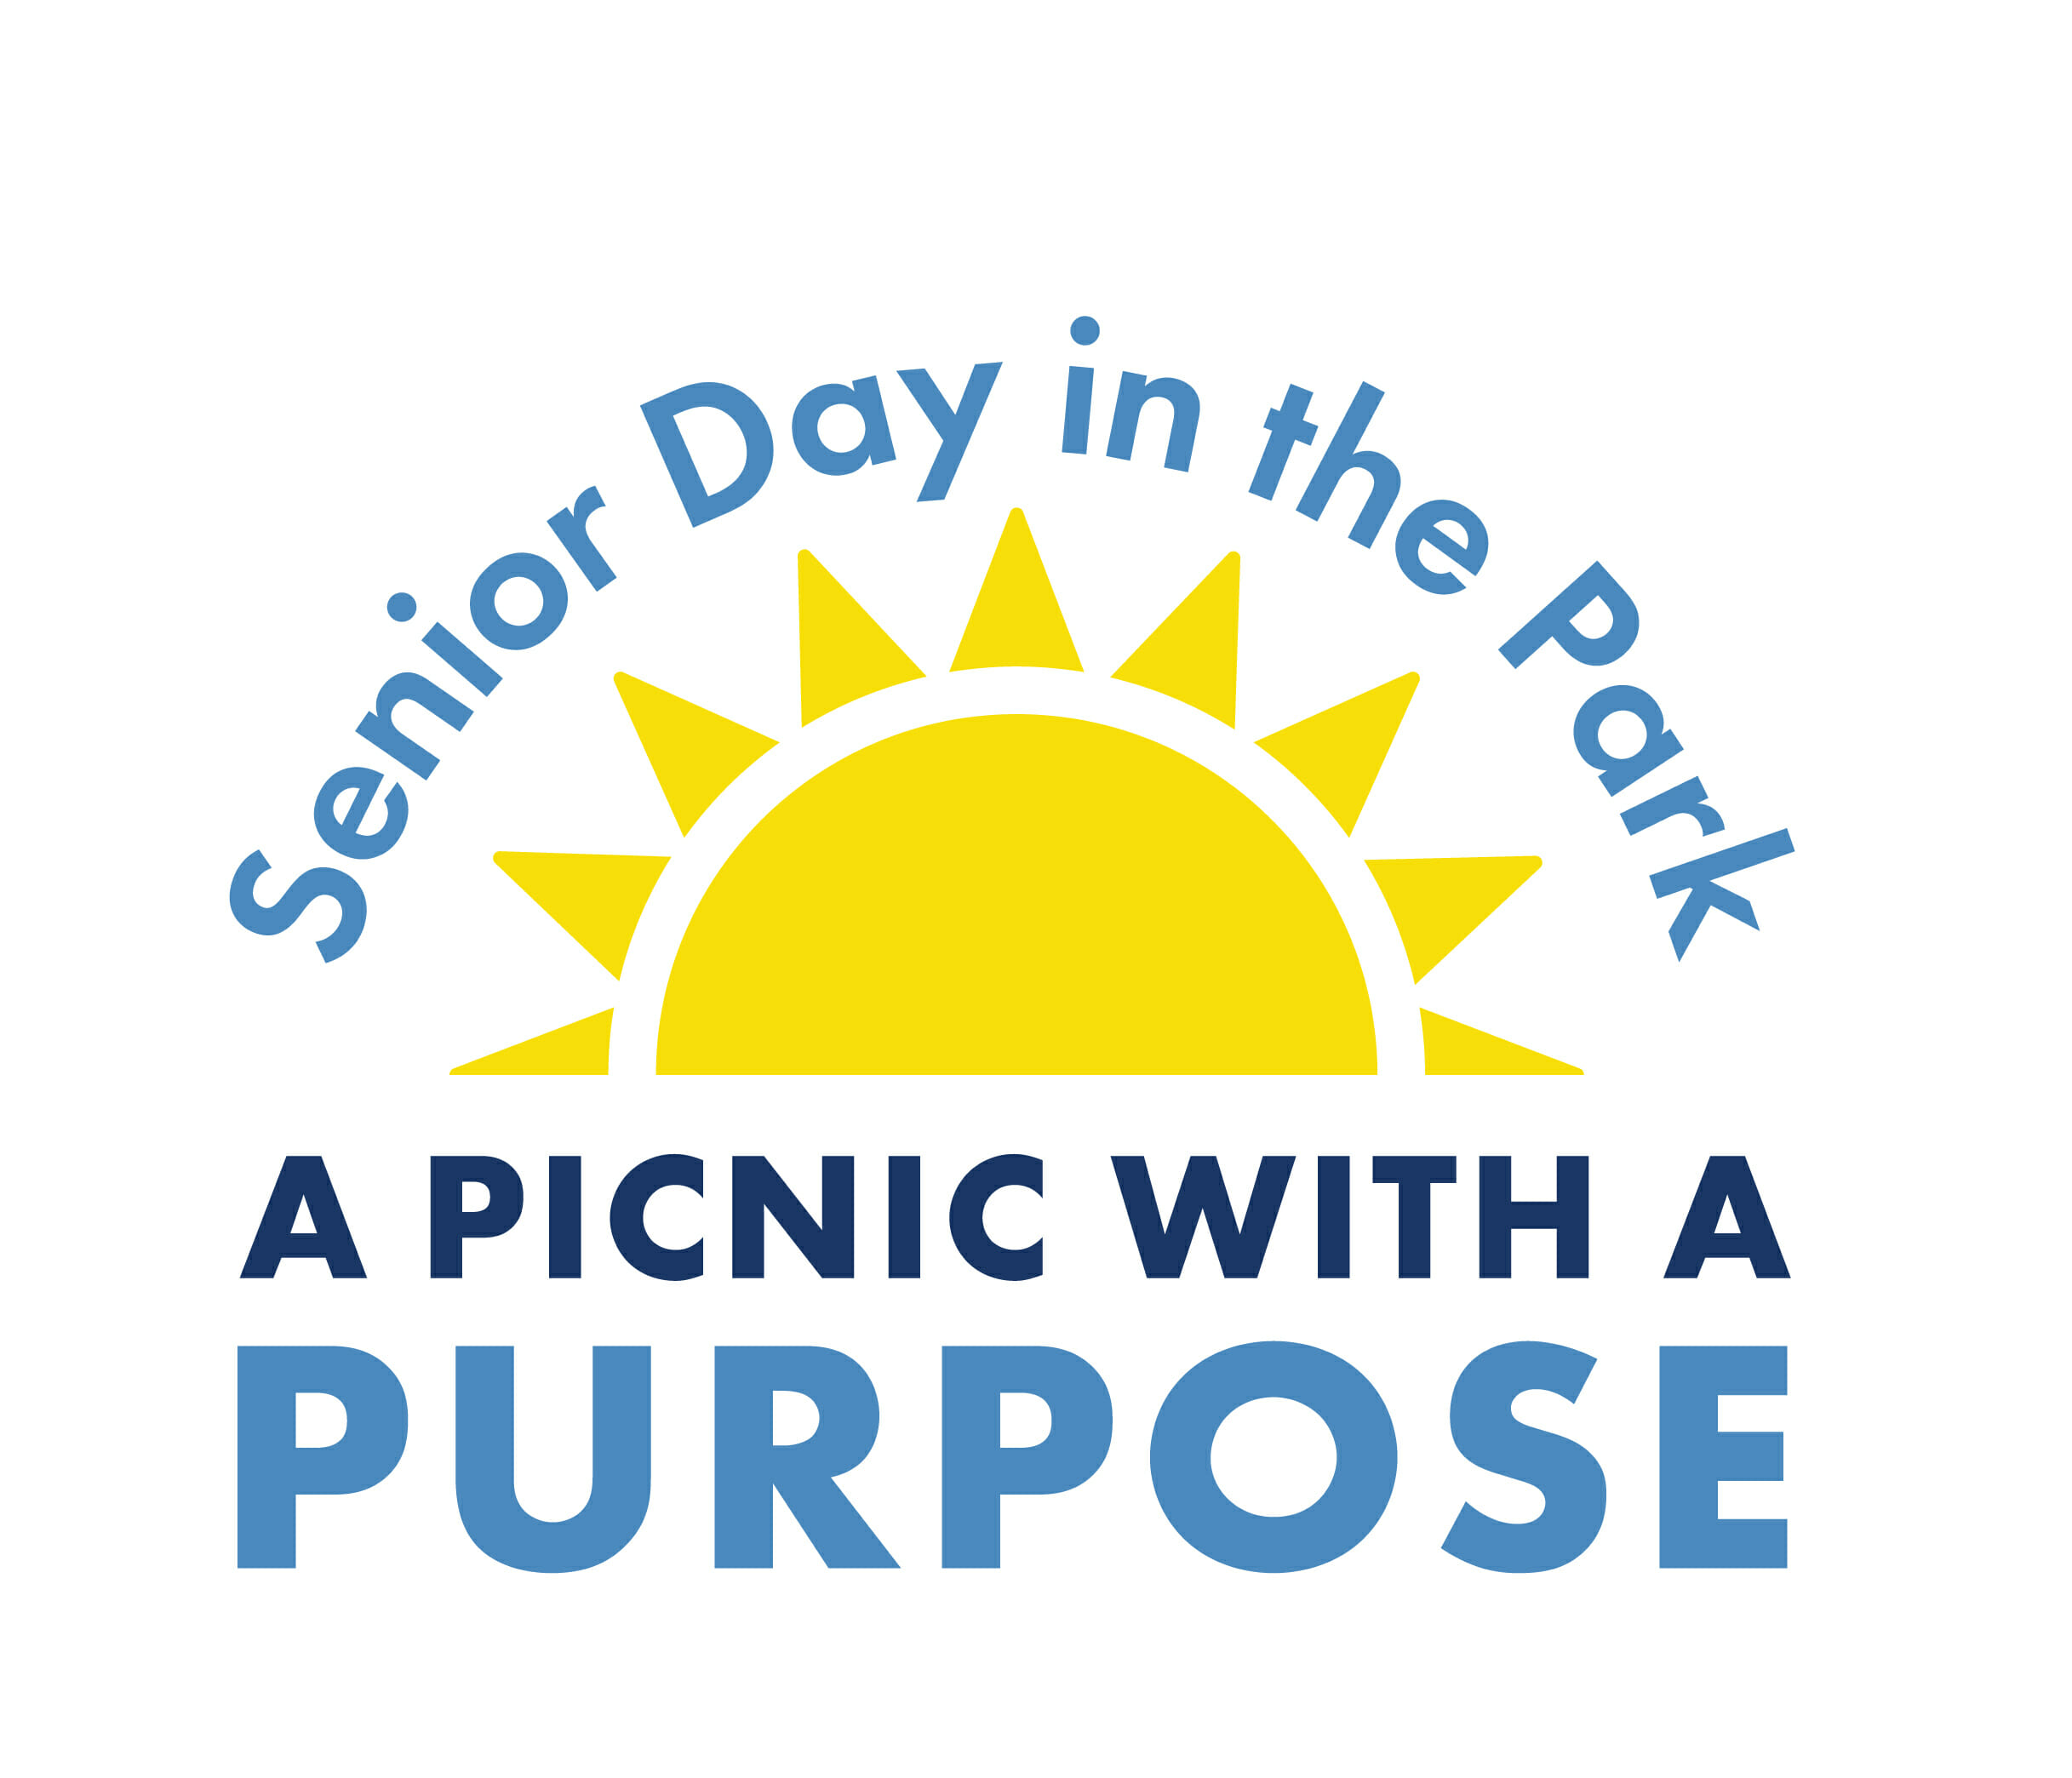 Senior Day in The Park Returns Council on Aging